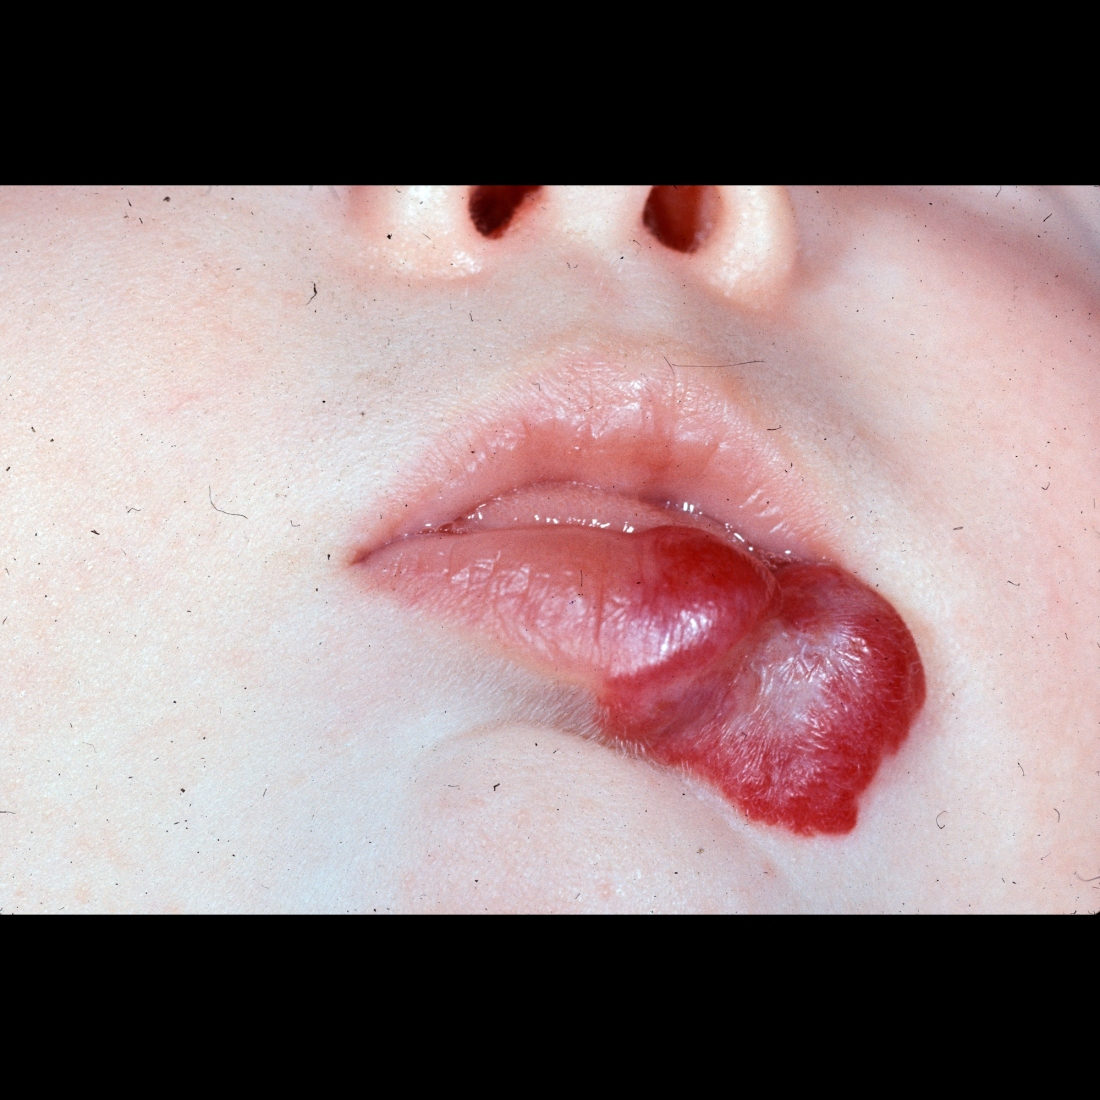 Infant with a red lesion near the mouth